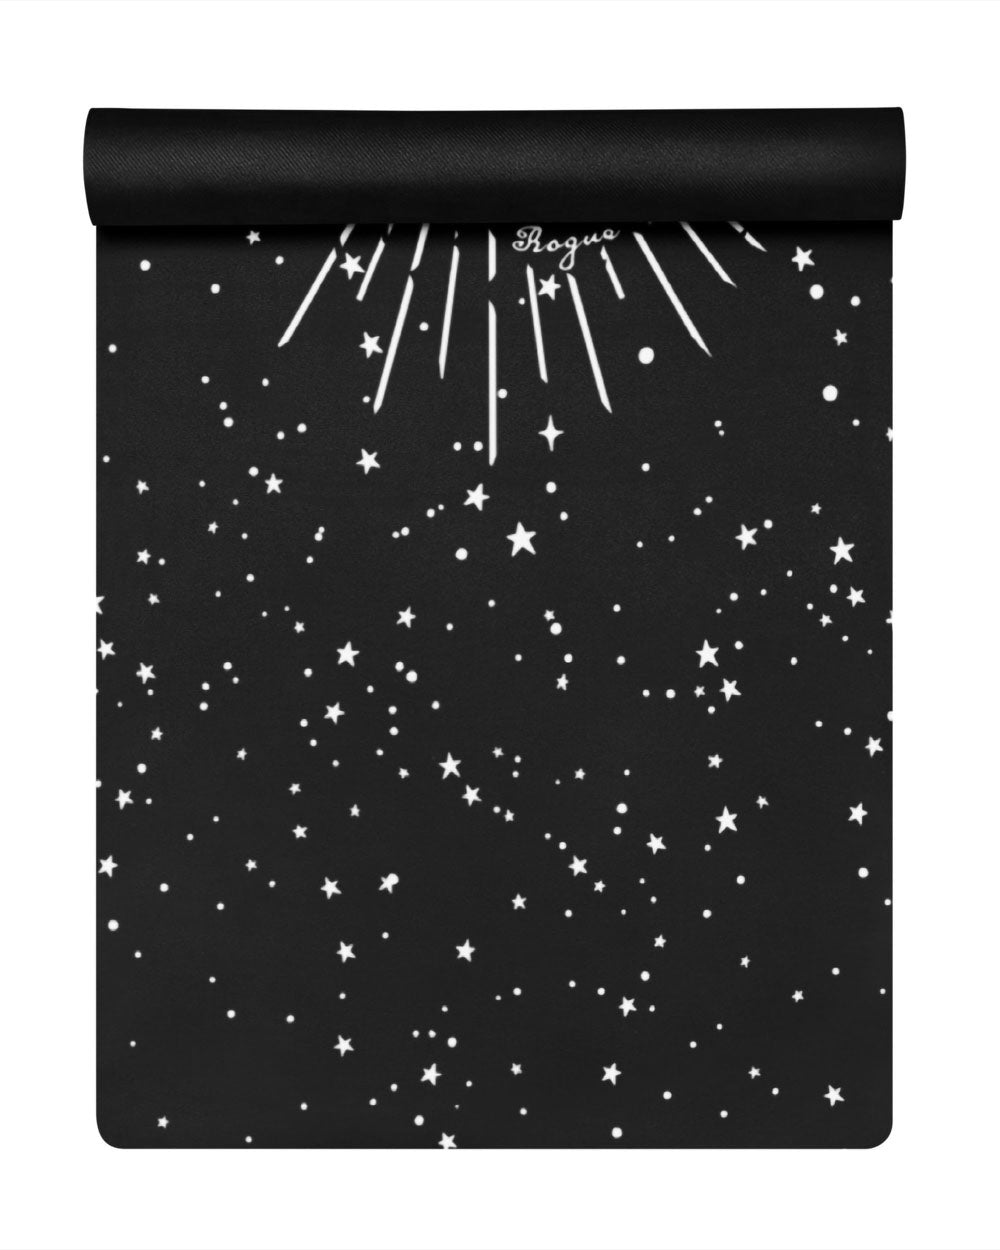 Astral Yoga Mat - Witchy, Goth & Dark Academia Style Sports Accessory - Alternative Occult Ethical Home Decor - On Demand Eco-friendly Sustainable Product